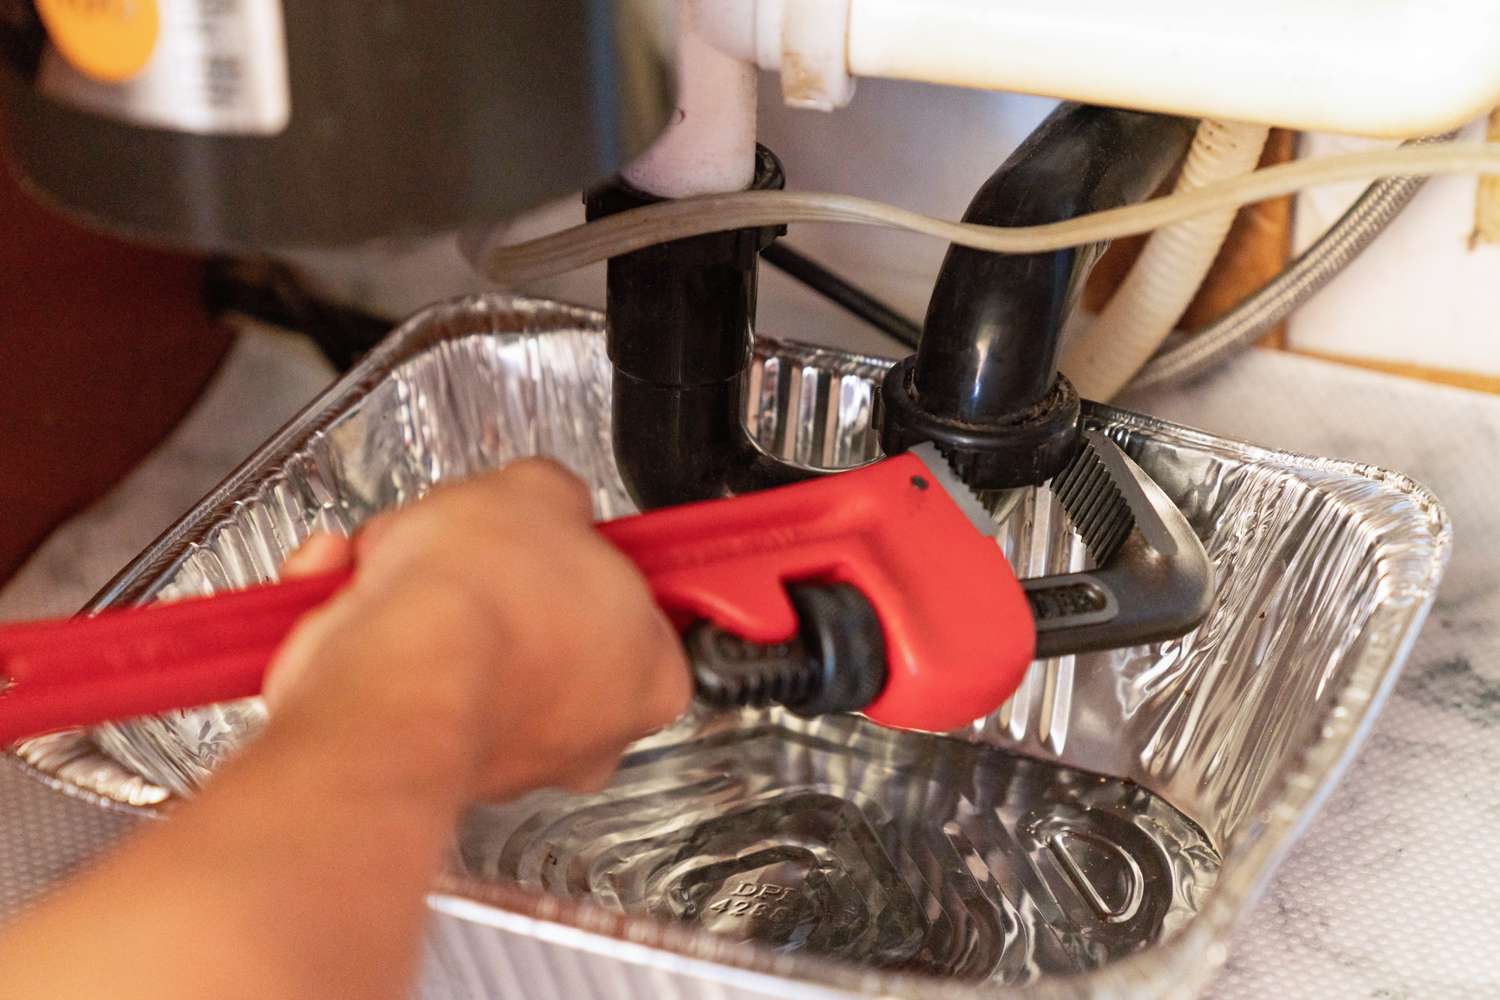 P-trap loosened with wrench under kitchen sink